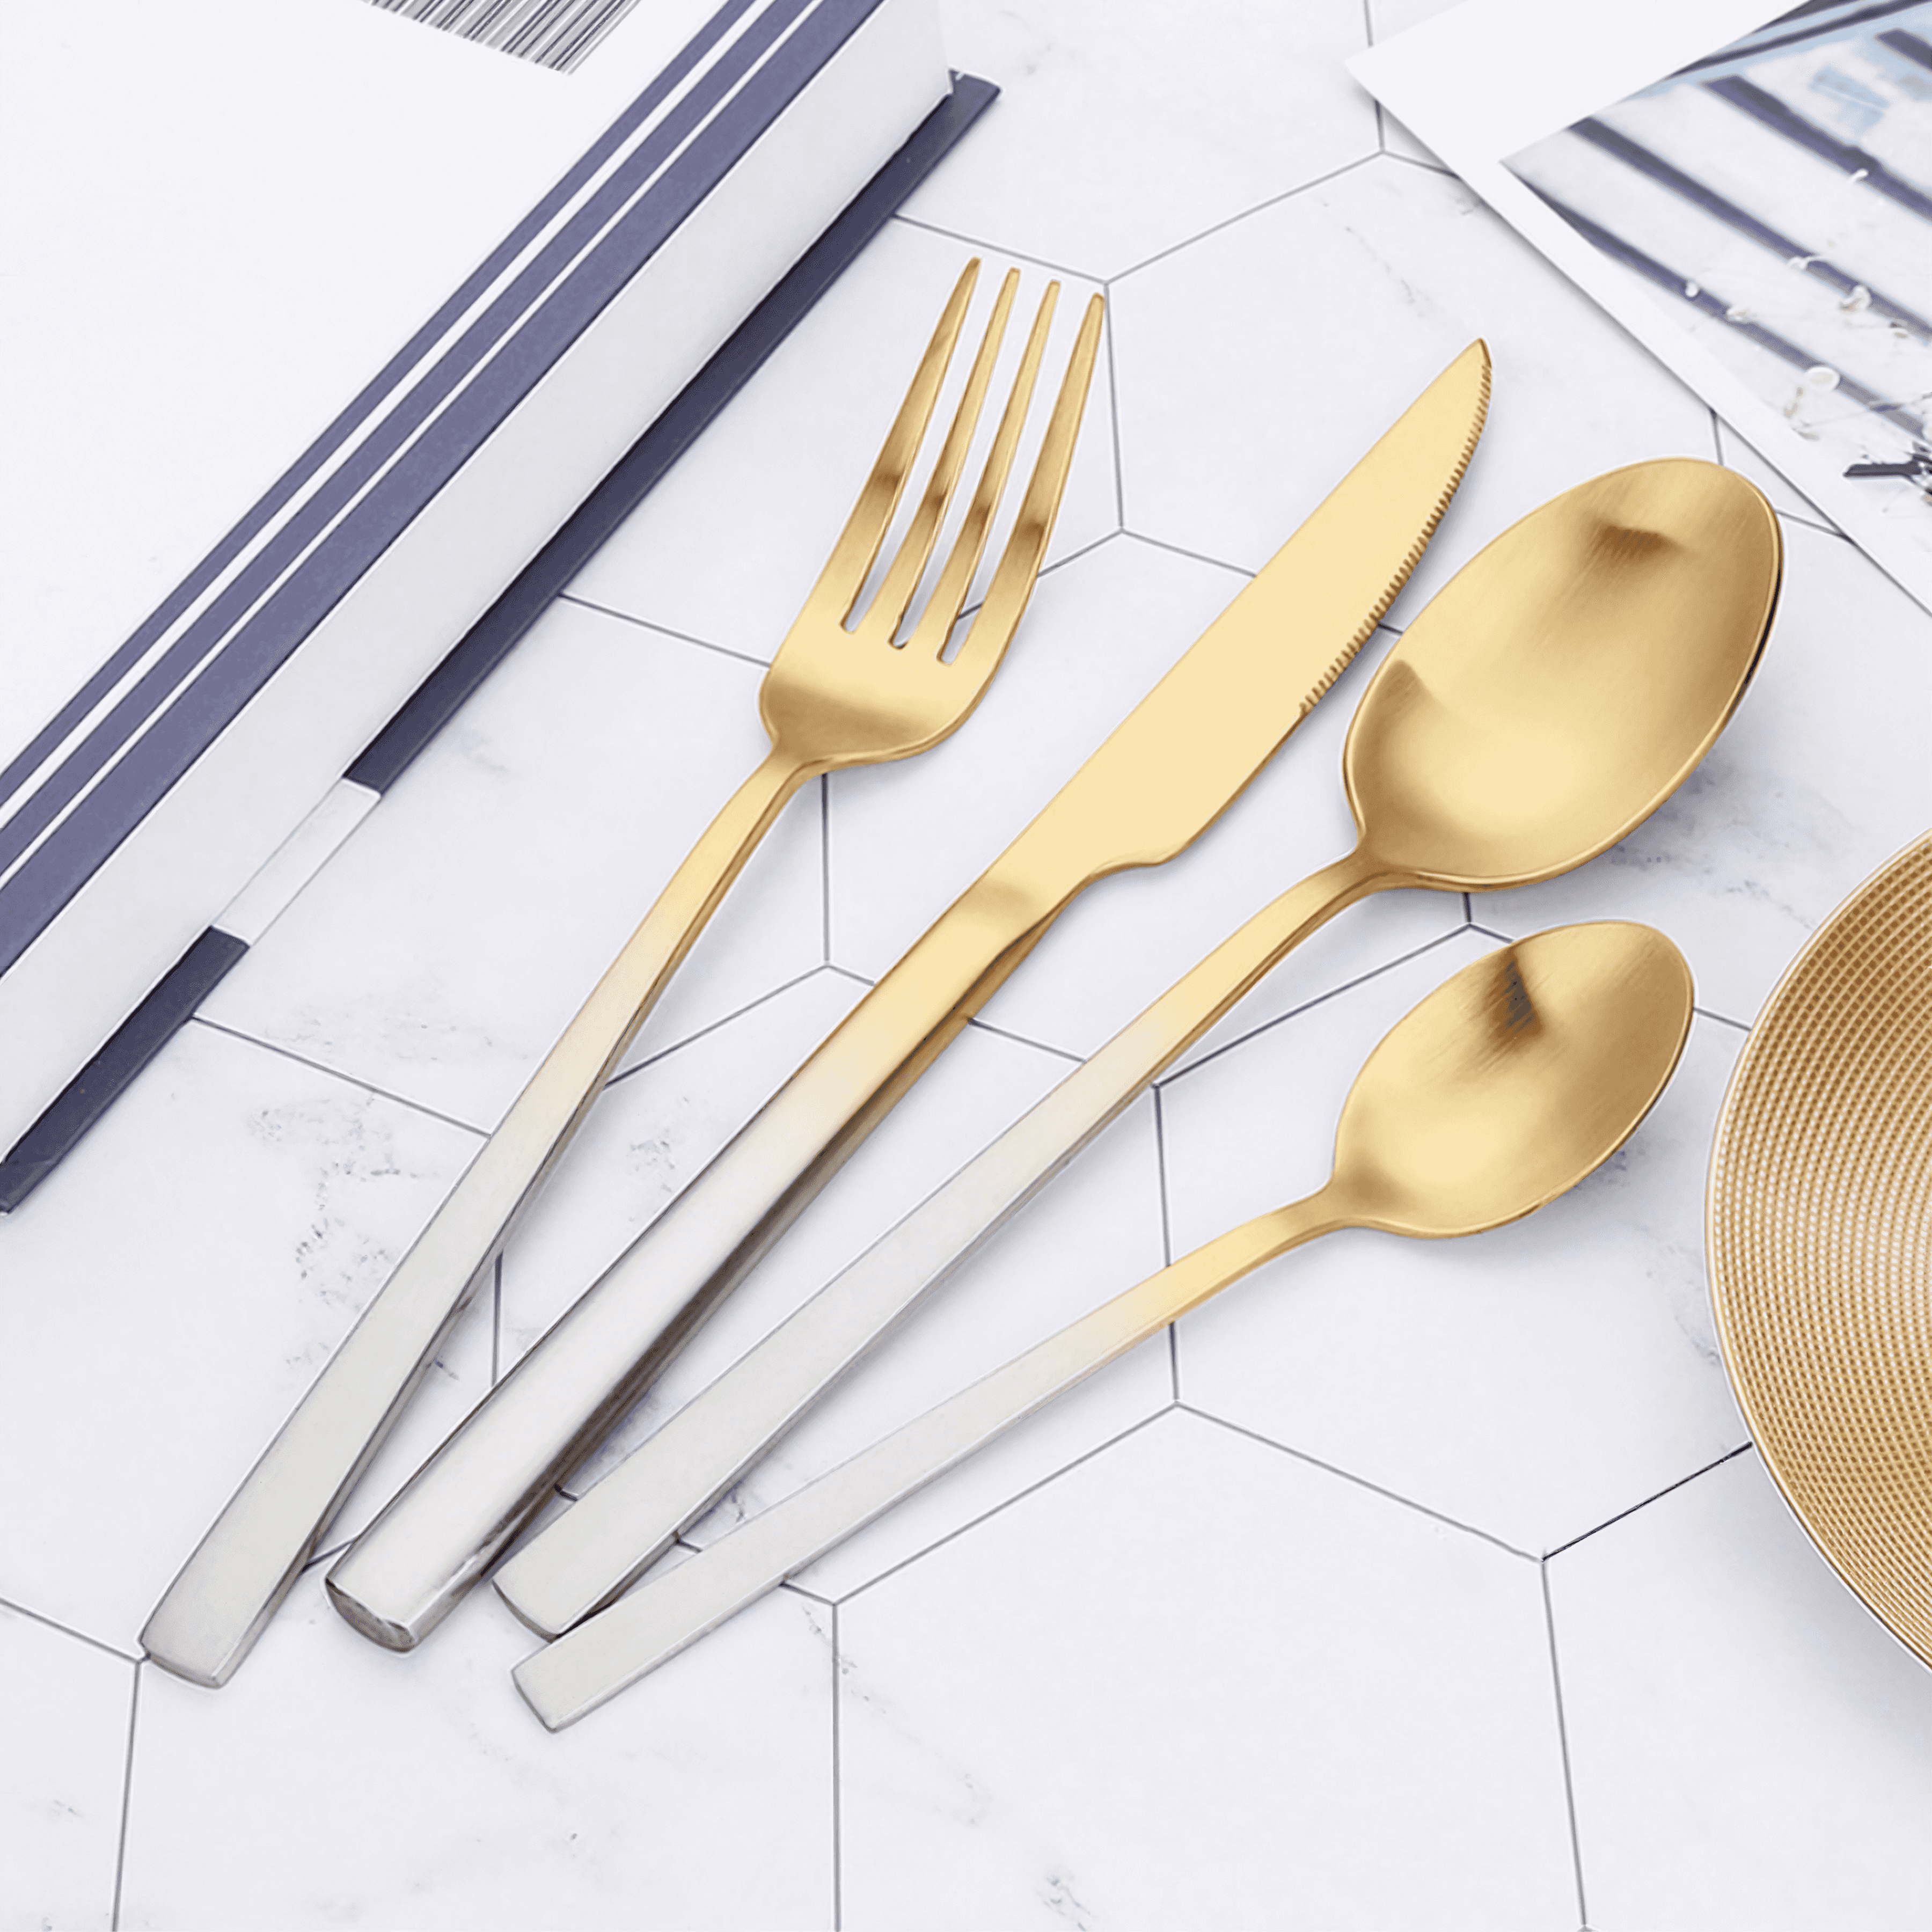 Köstlich Germany Platinum & Gold Plated 24 pcs Stainless Steel Cutlery Set